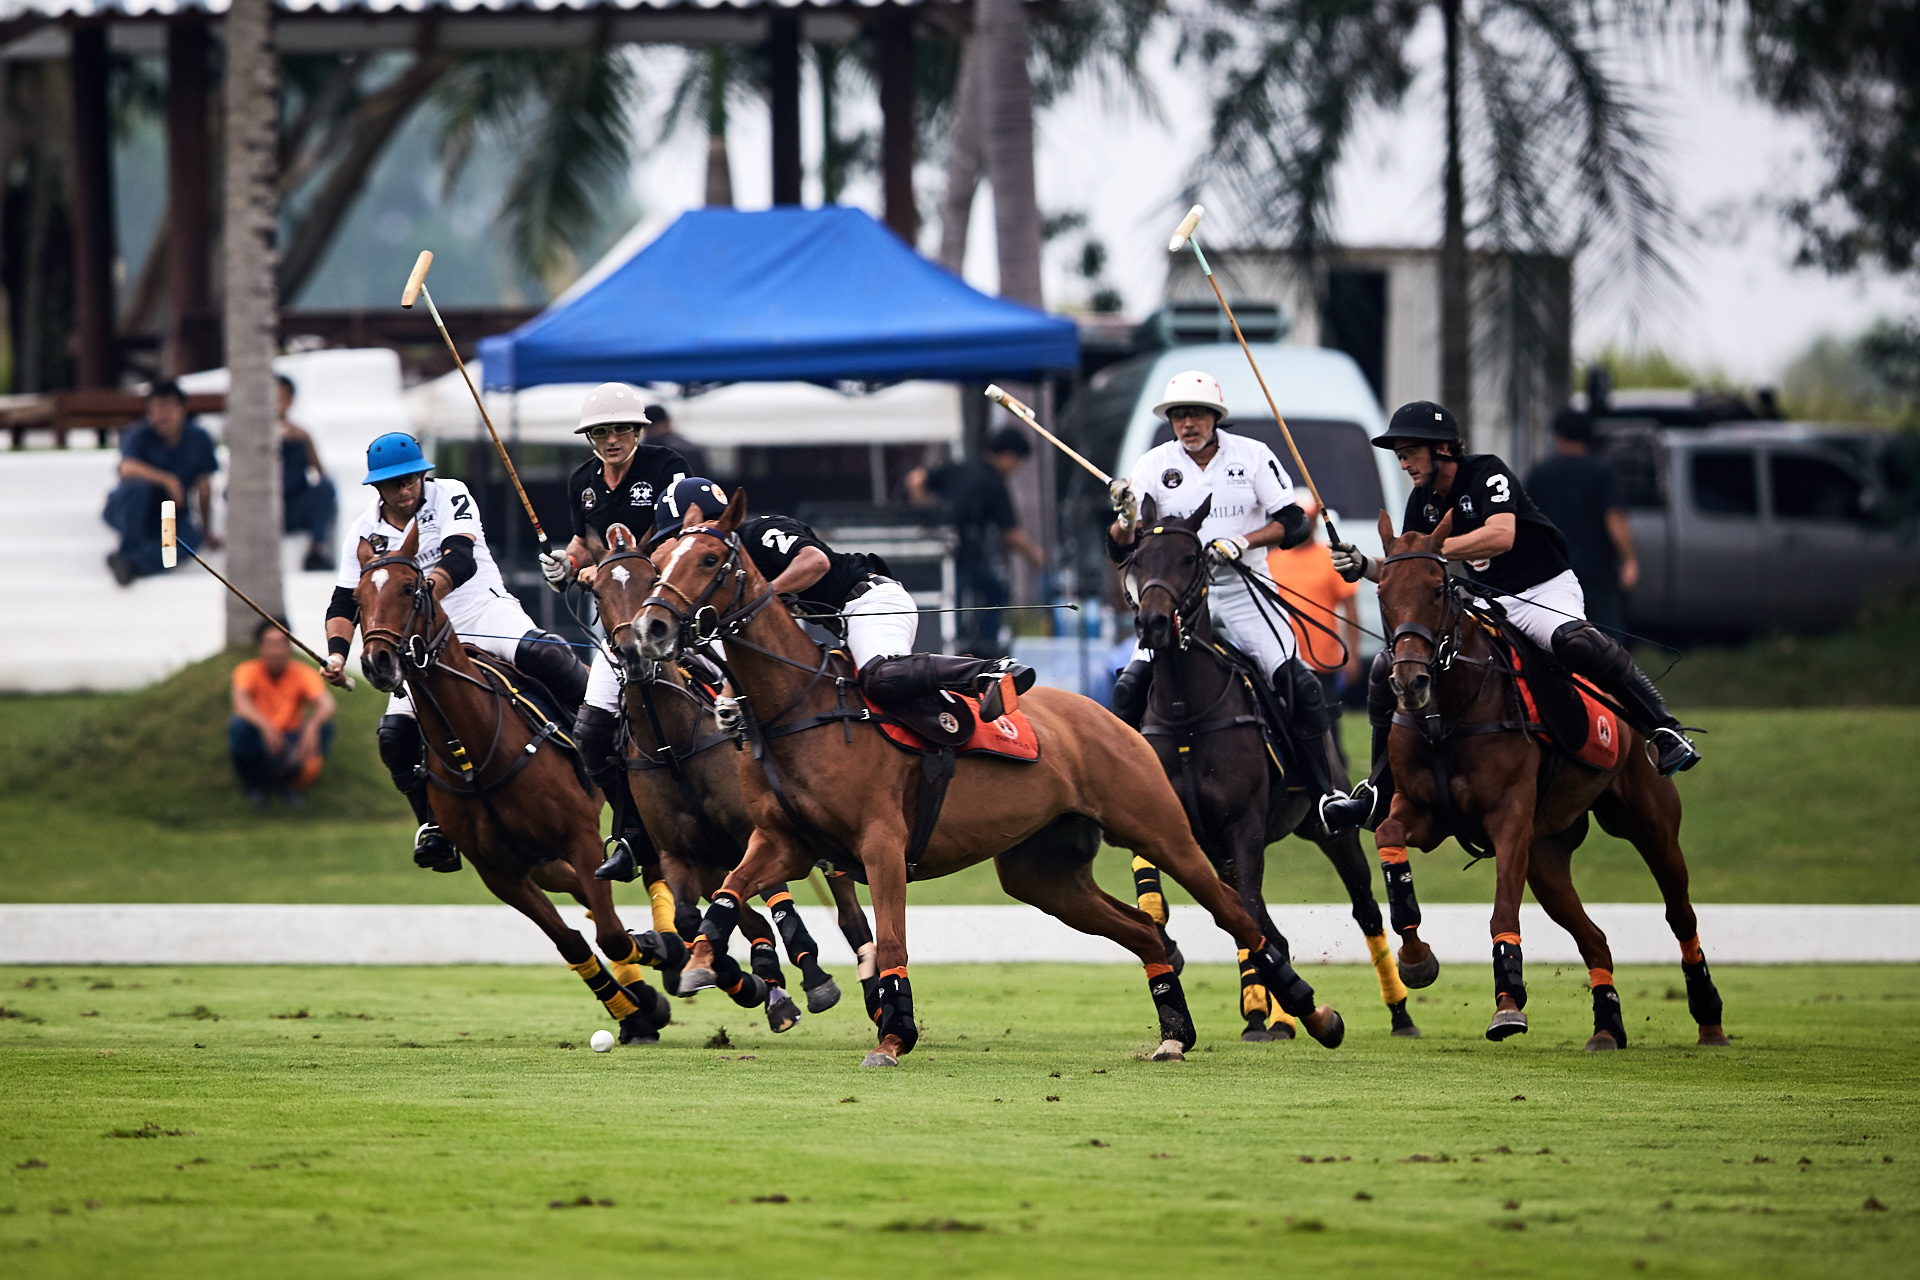 Thai Polo and La Familia players battle for possession during the first chukka of the final.